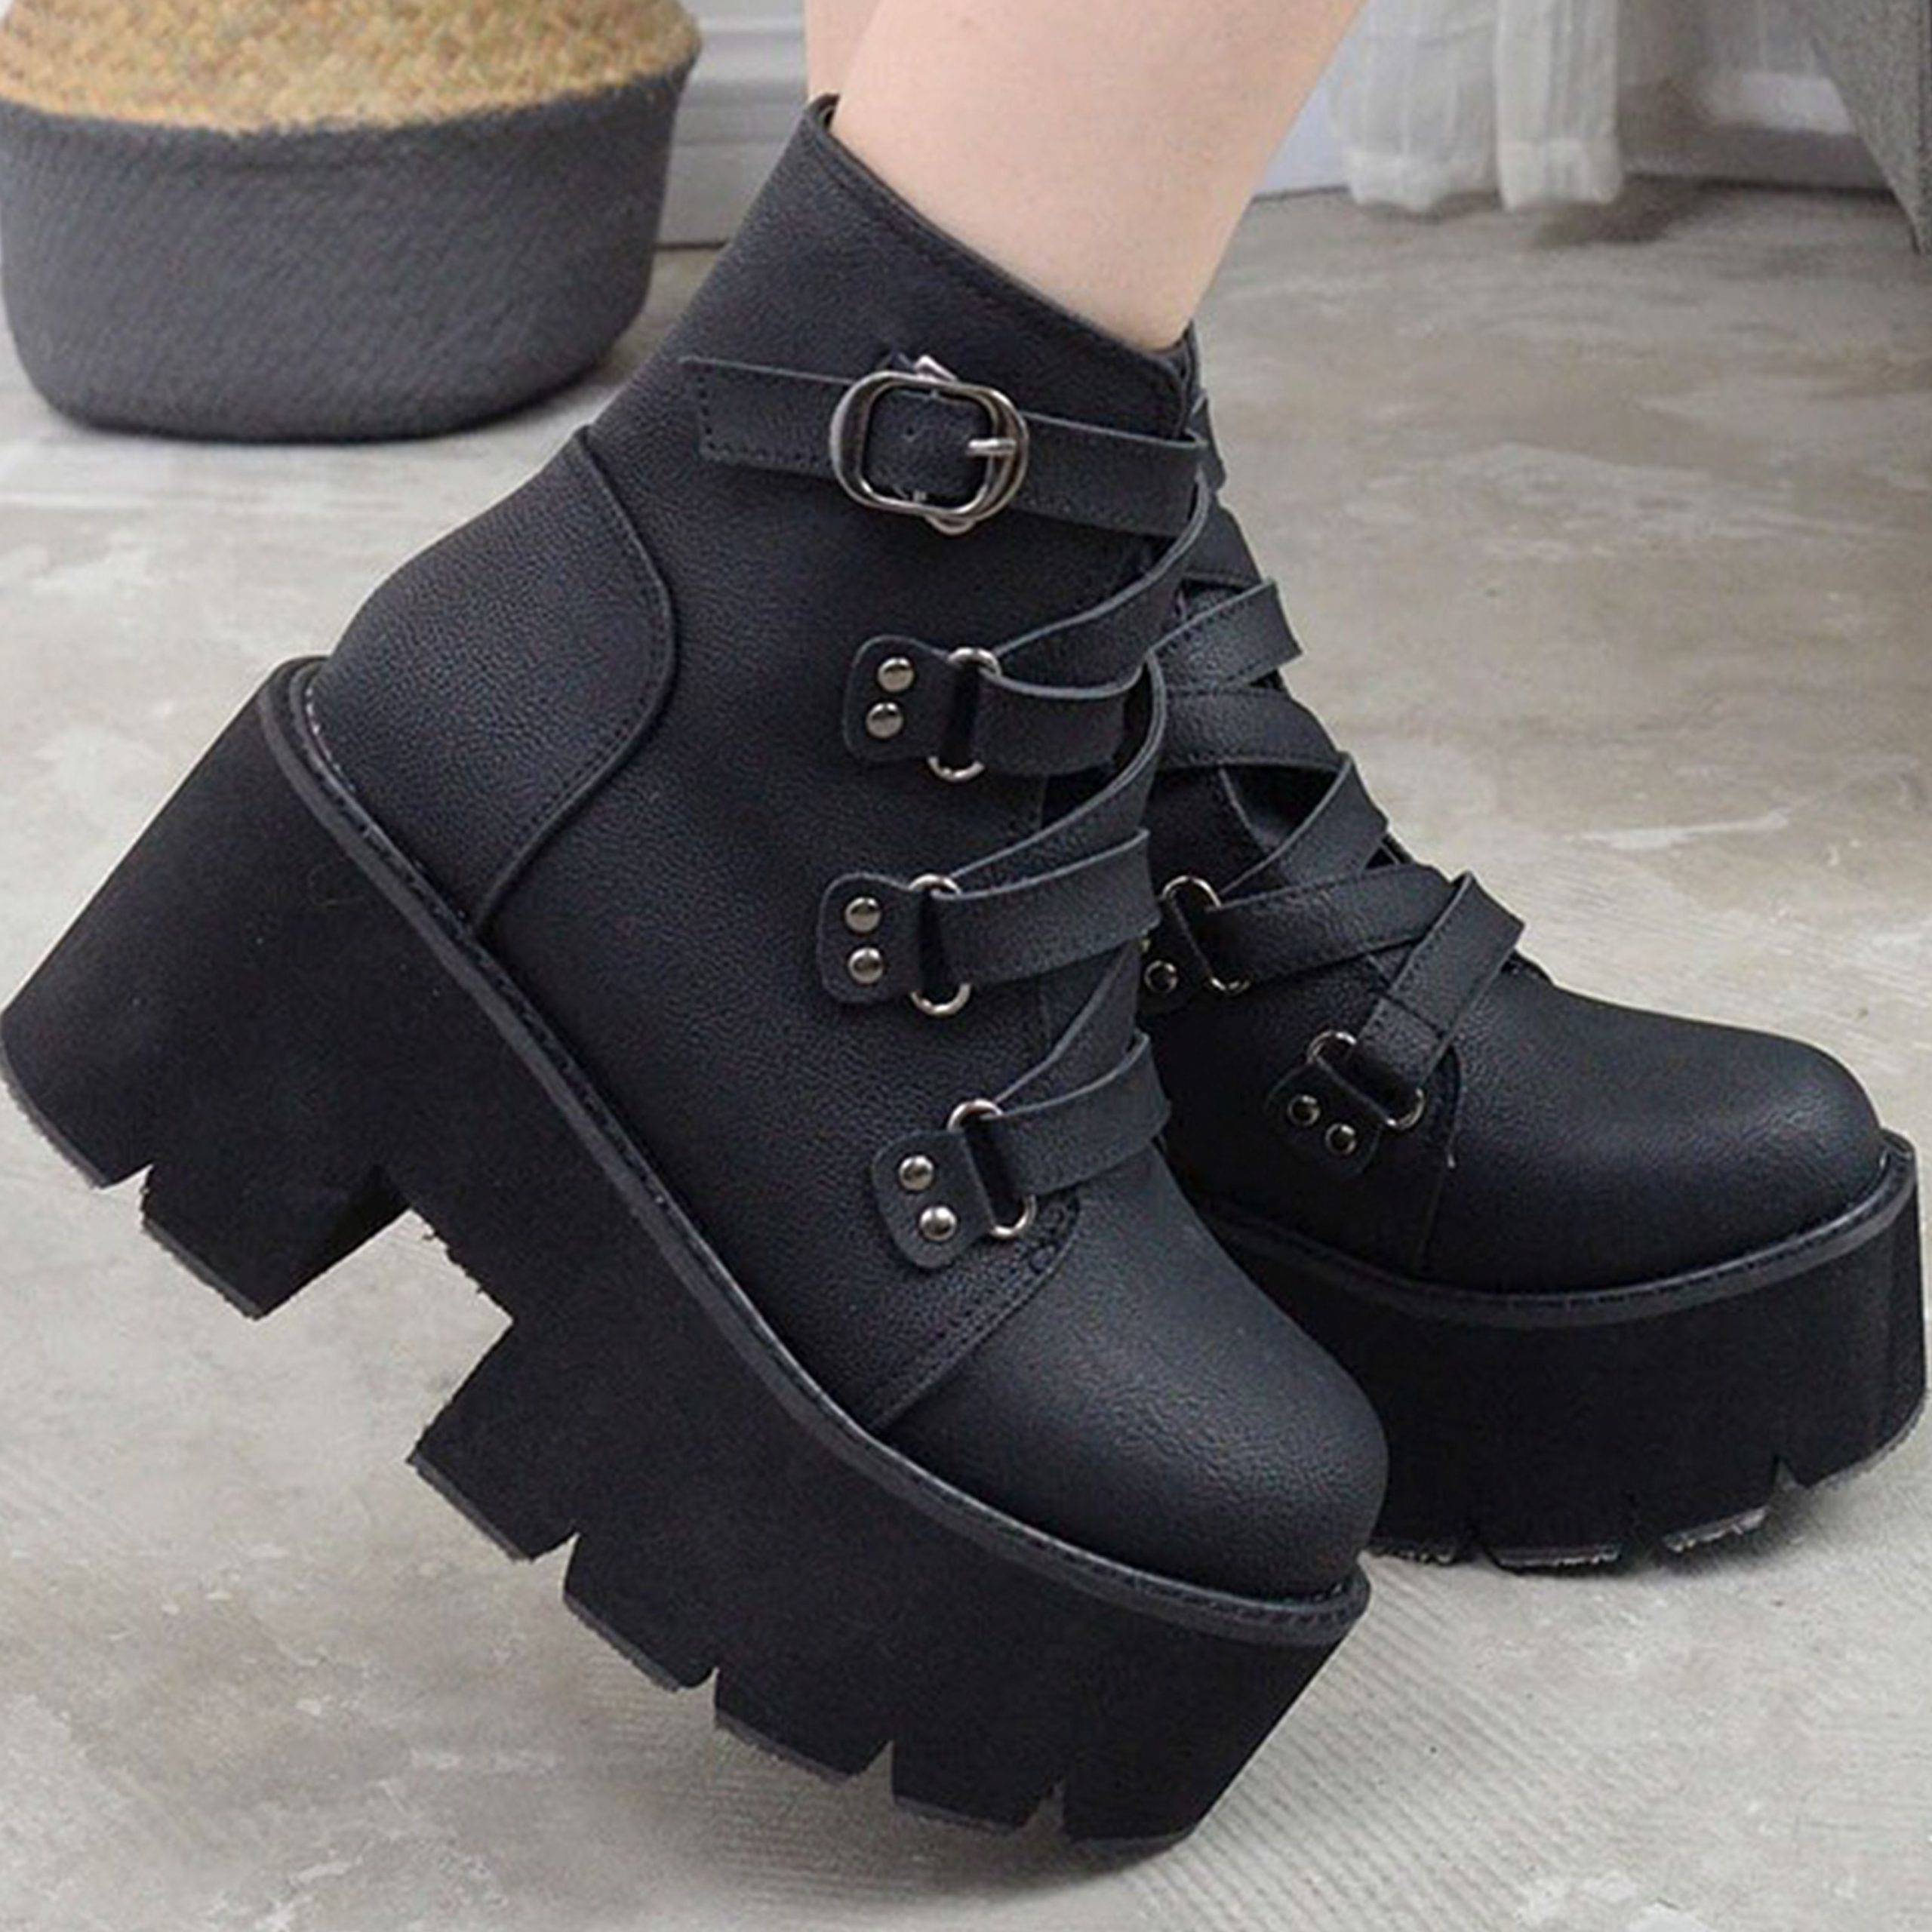 Goth Platform Shoes Platform Boots Motorcycle Boot Platform Shoes Chunky Shoes Gothic Boots Biker Boot High Heels Lace Up Shoes